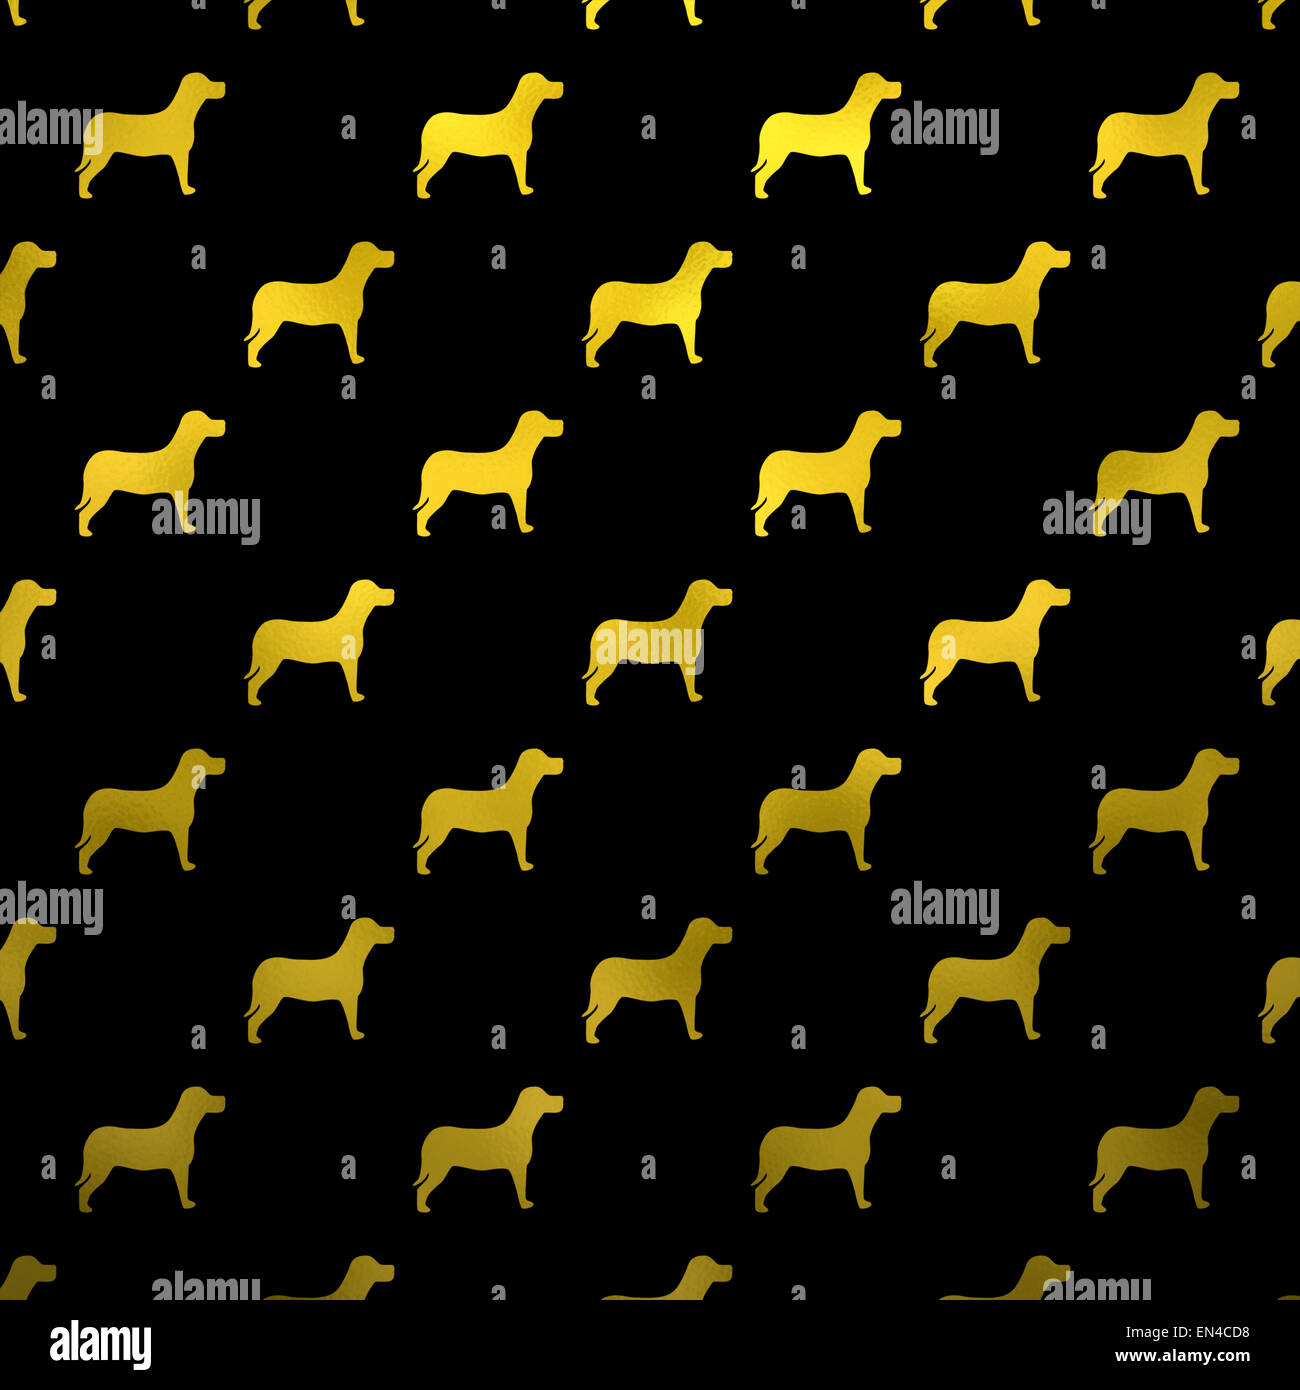 Gold and Black Dogs Faux Foil Metallic Dog Polka Dots Background Pattern Texture Stock Photo